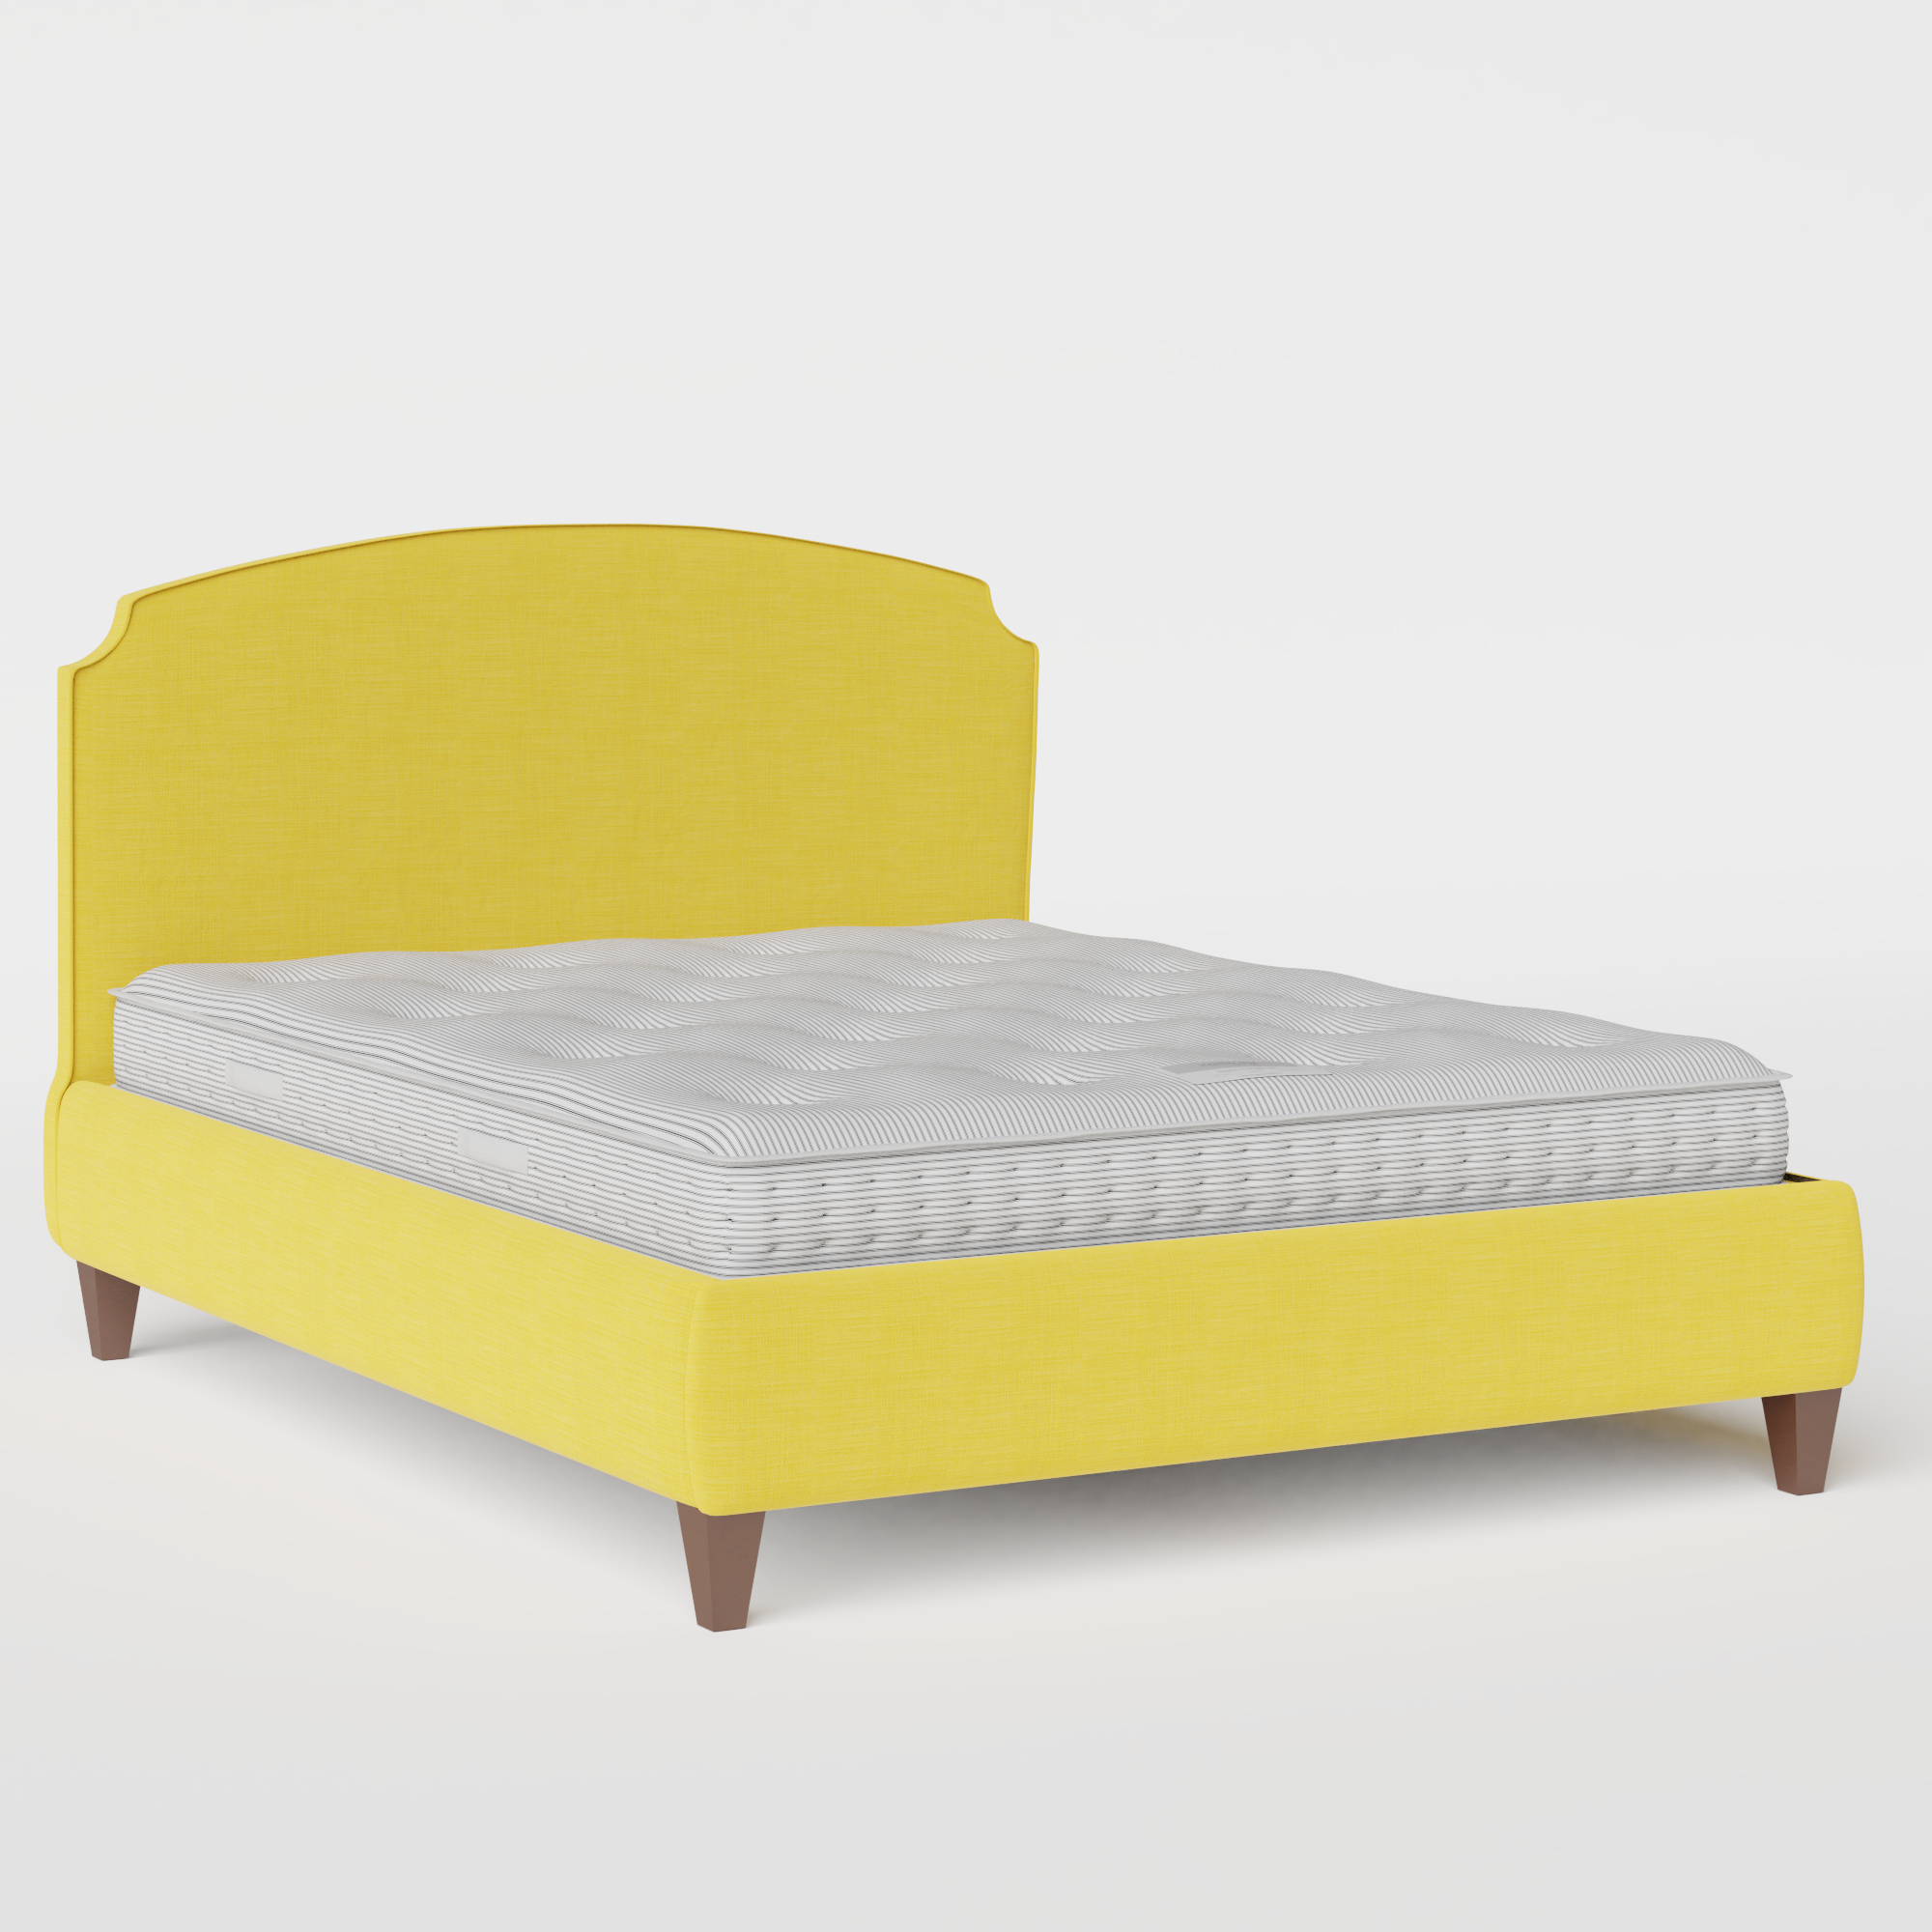 Lide with Piping stoffen bed in sunflower